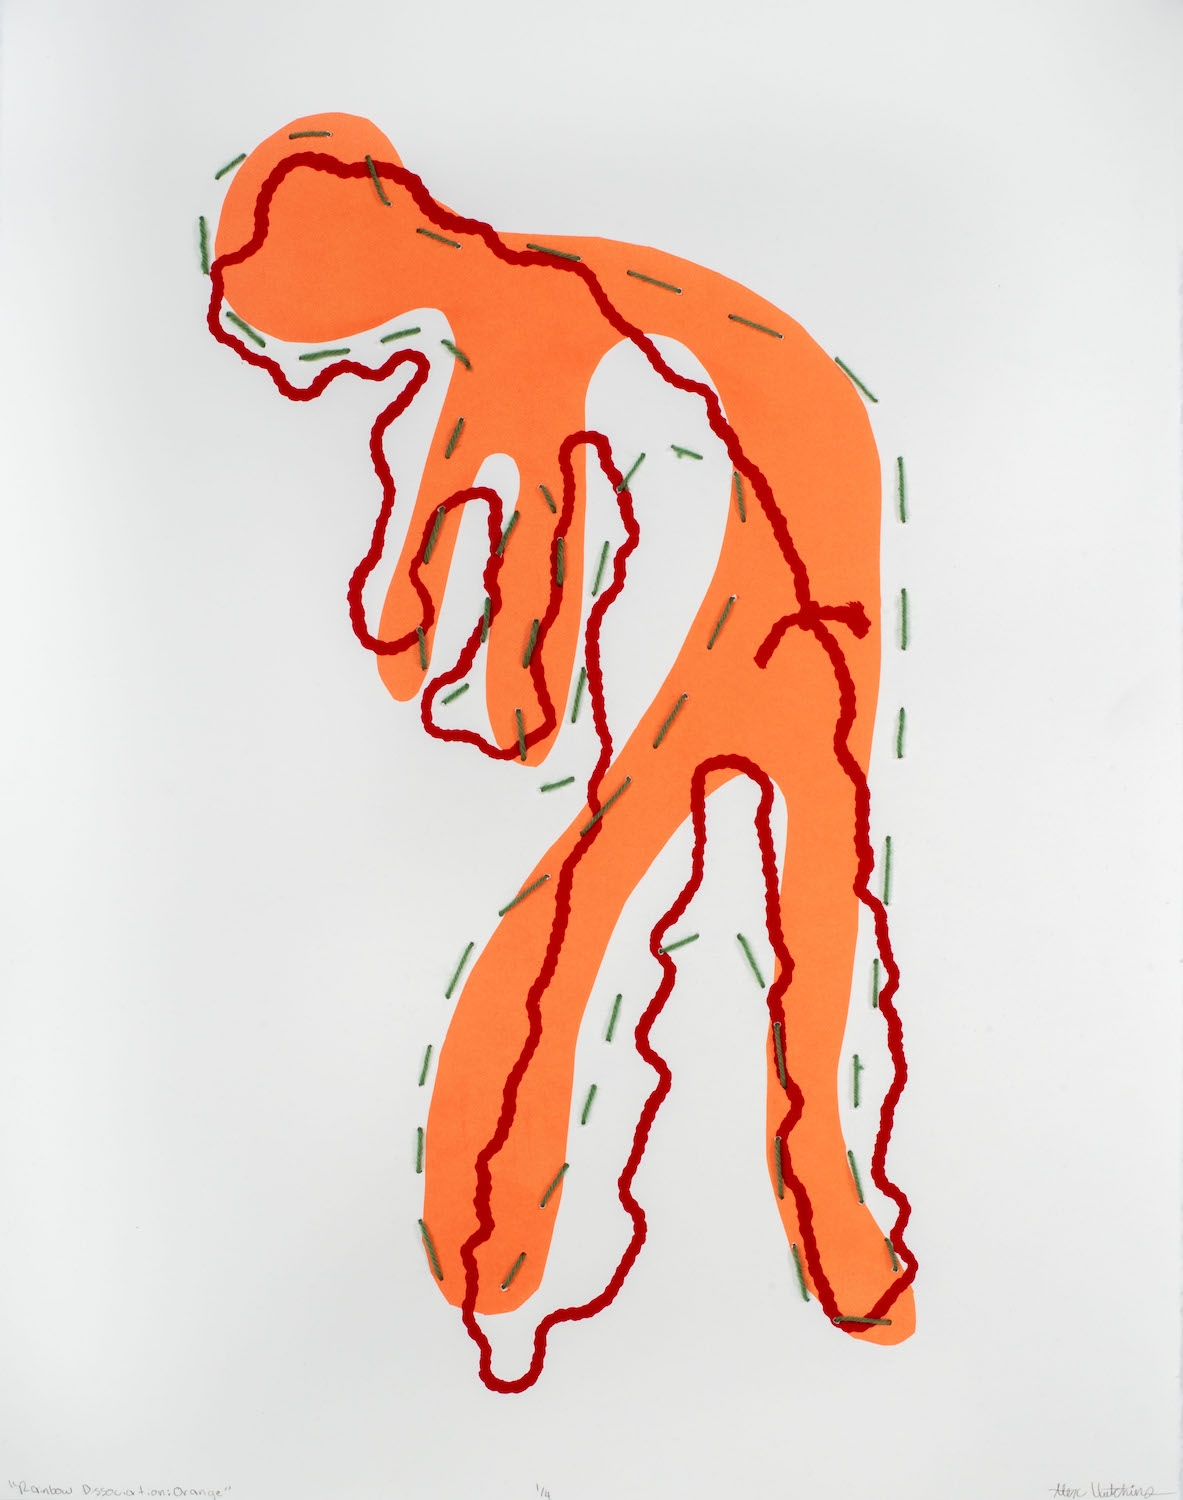 figure in orange with loose tracings in solid red and dashed green